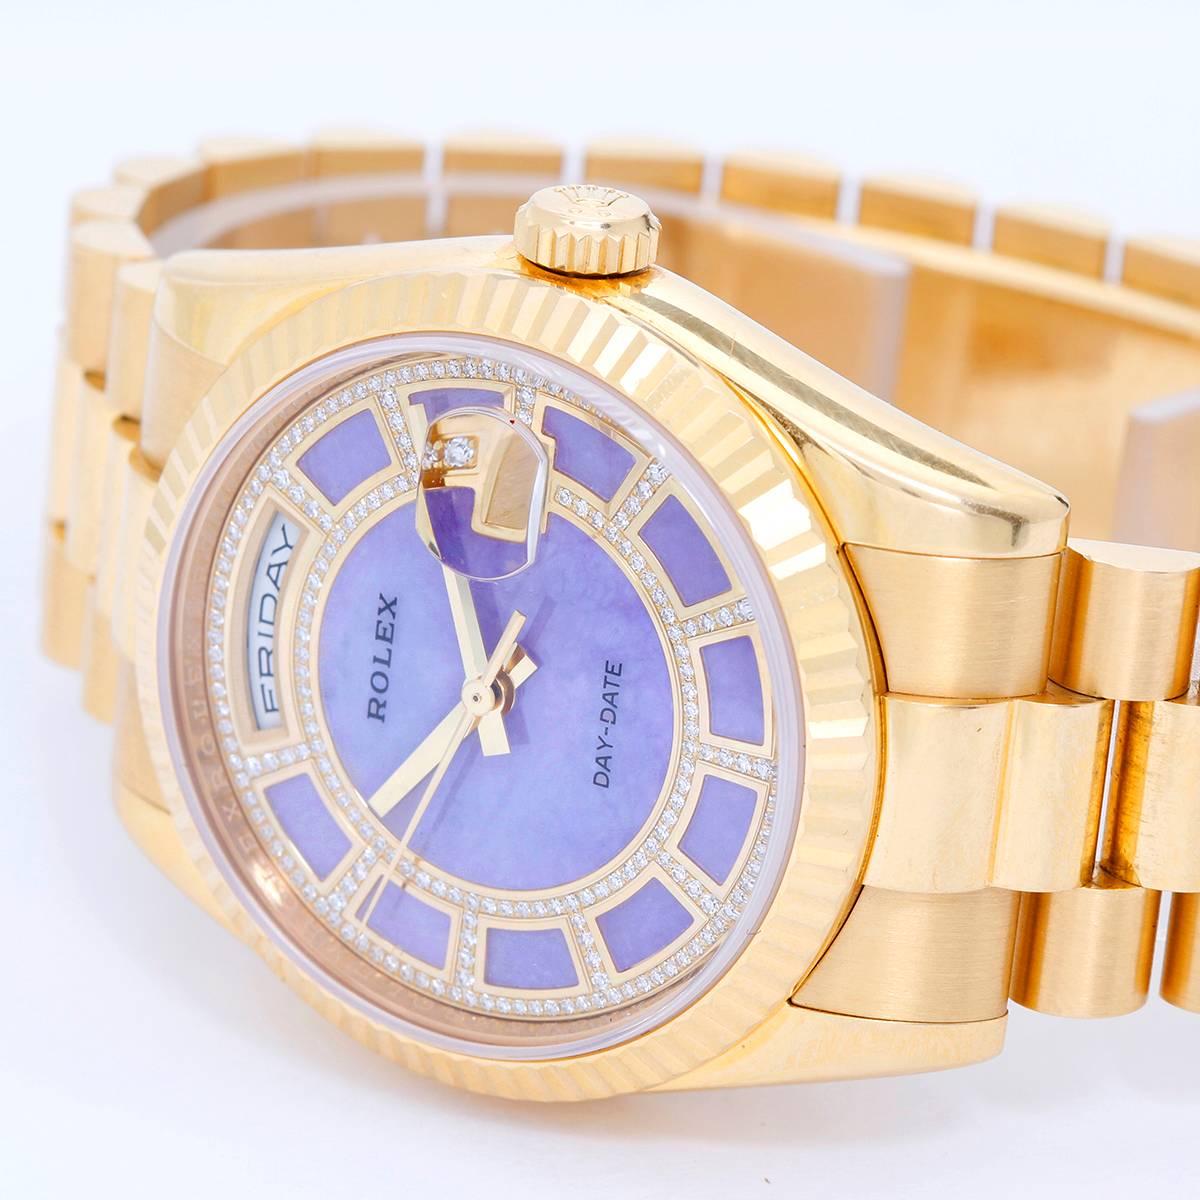 Rolex President Day-Date Men's 18k Gold Watch 118238 White Roman -  Automatic winding, 31 jewels, Quickset, sapphire crystal. 18k yellow gold case with fluted bezel (36mm diameter). Genuine Rolex Lilac Stone Carousel Diamond Dial. 18k yellow gold